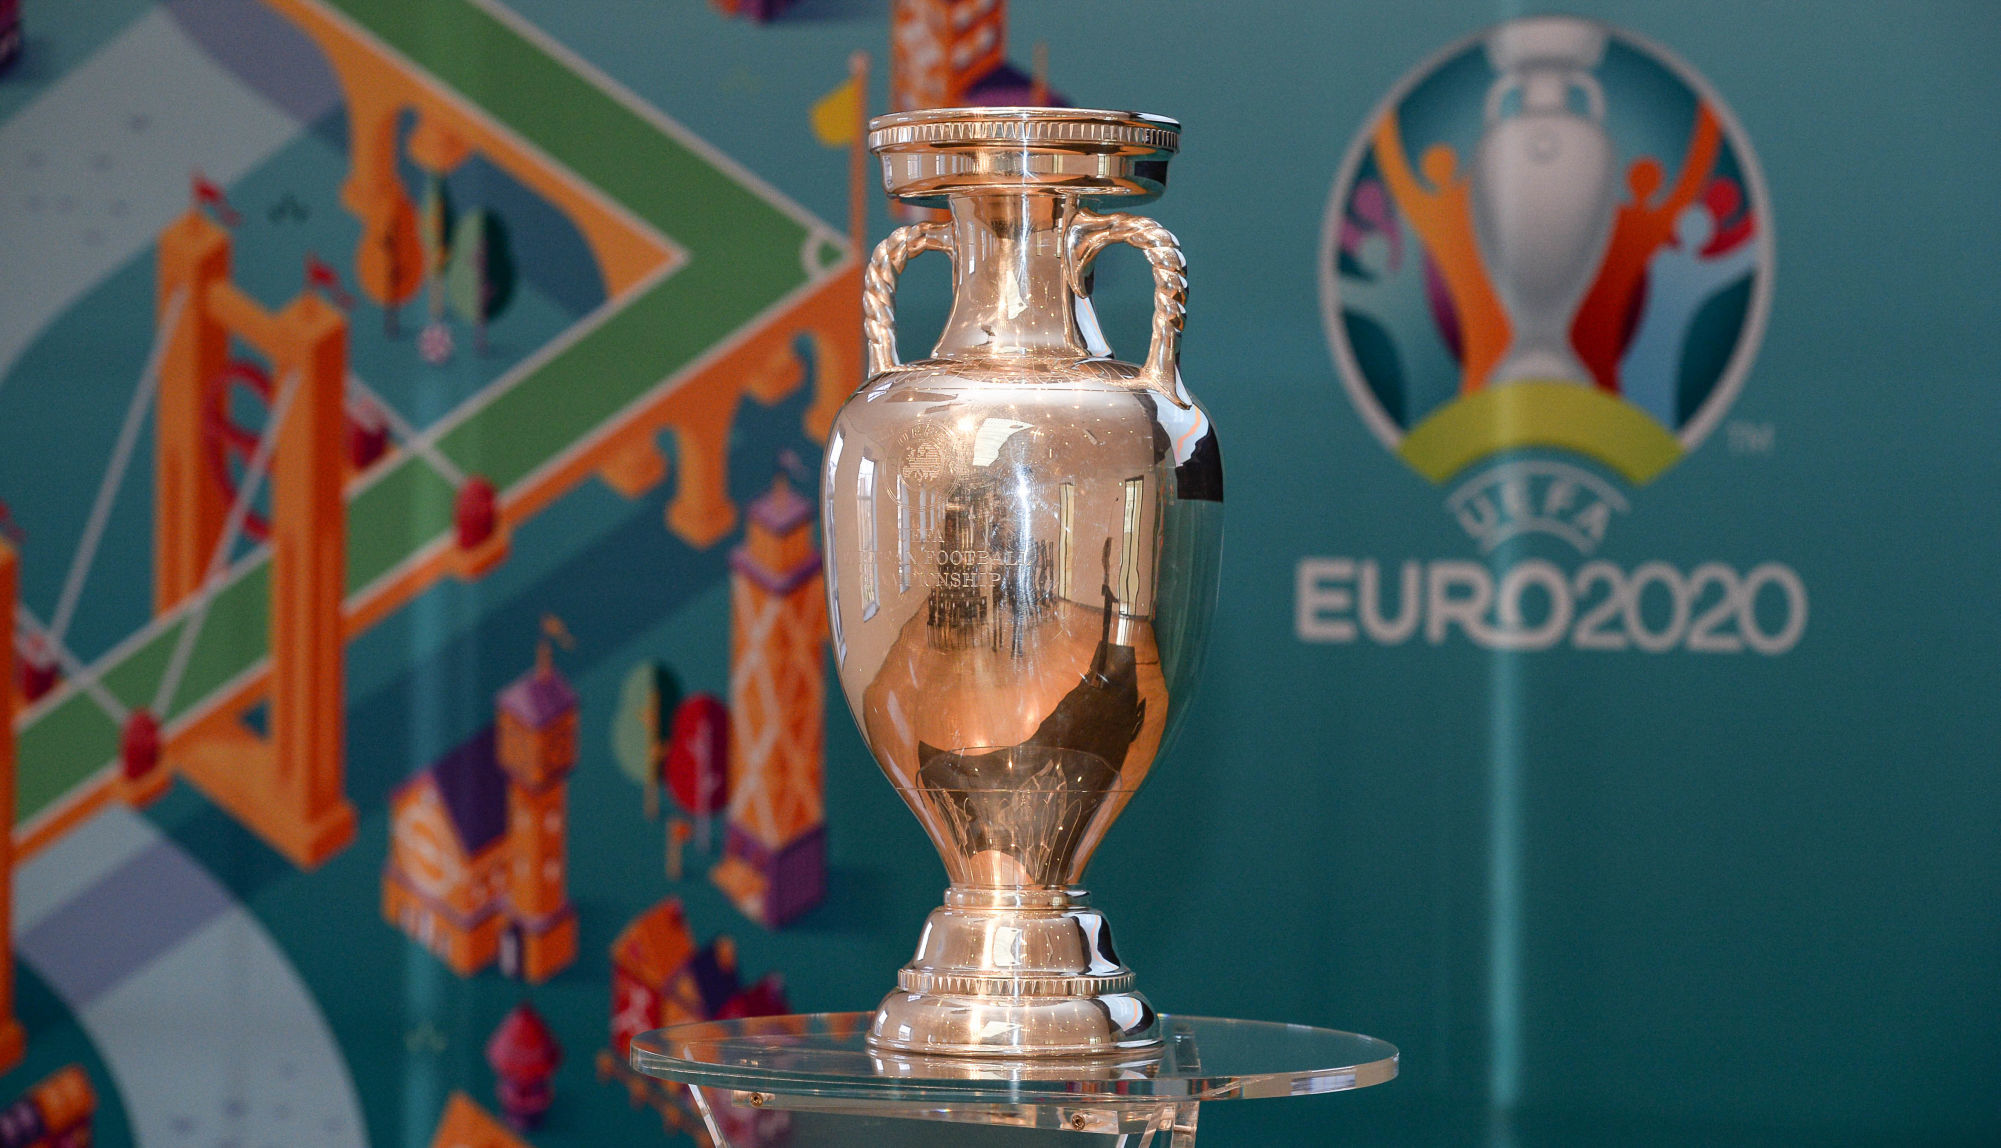 20161216 - AMSTERDAM , NETHERLANDS : illustration picture of the Euro 2020 Champions cup during the UEFA EURO 2020 Host City Logo Launch event at the Hermitage Amsterdam Venue in Amsterdam , The Nethe